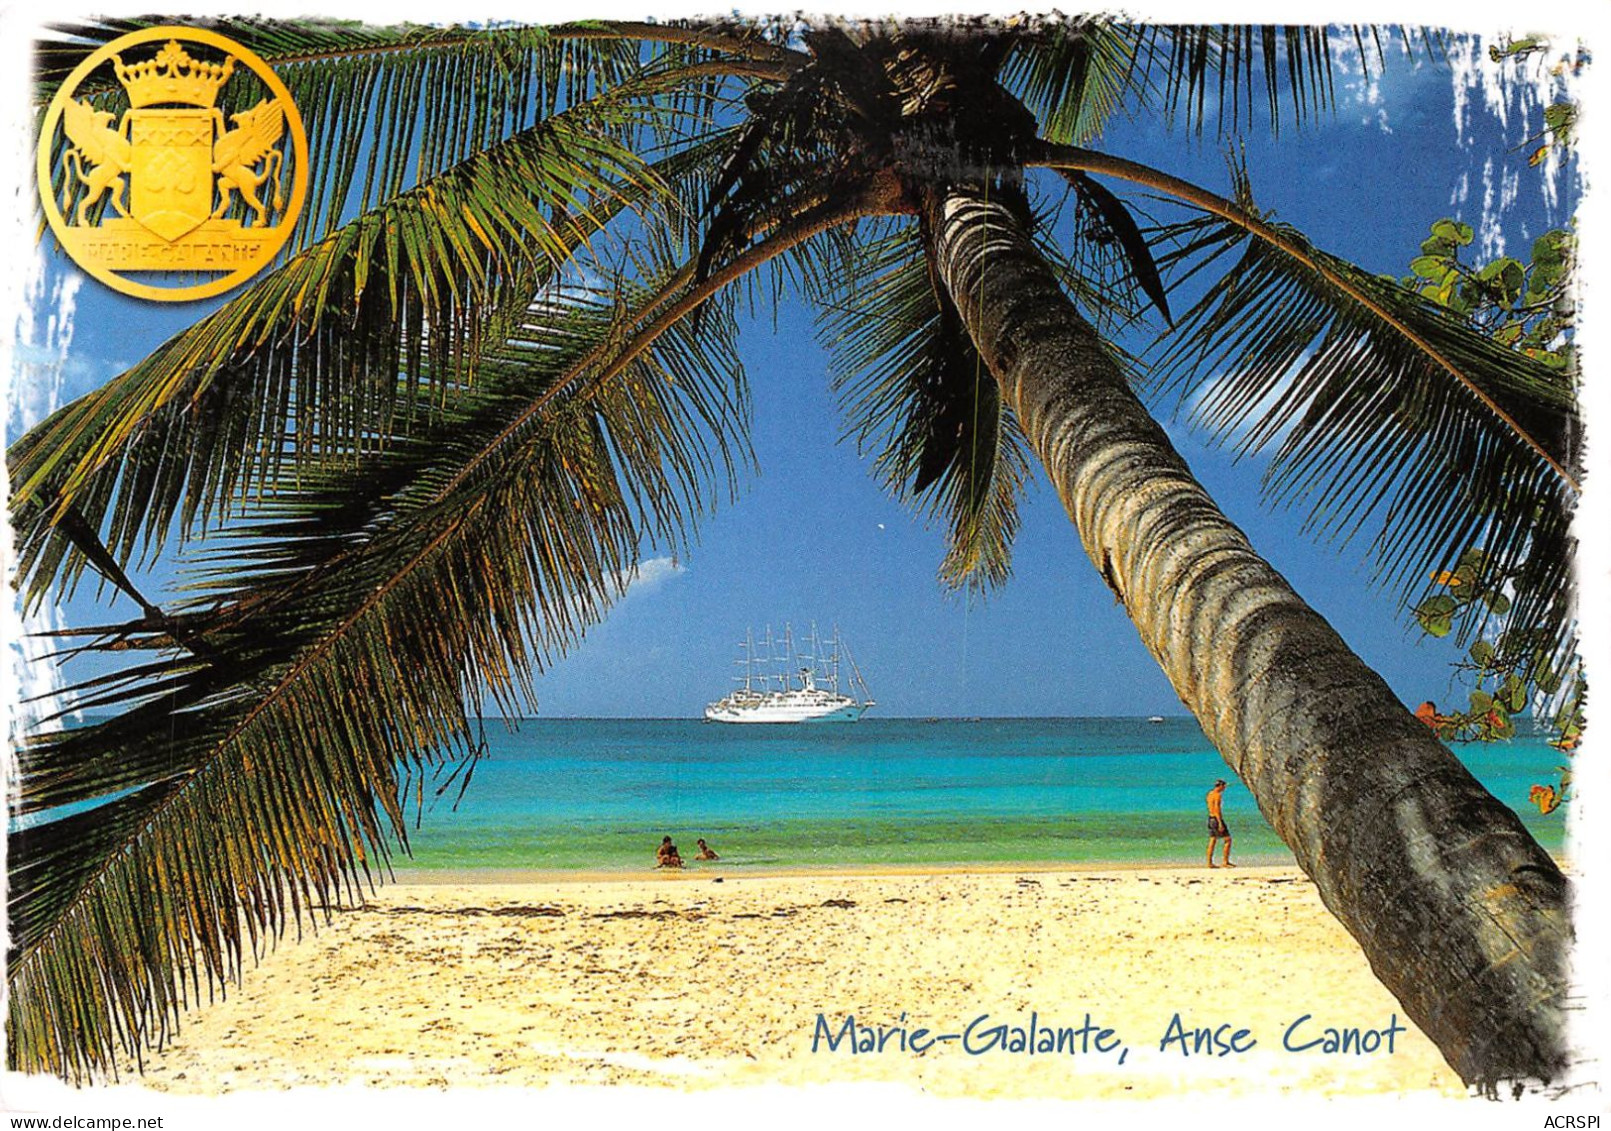 97 Guadeloupe  Marie-Galante Anse Canot Et Club-Med One (Scan R/V) N°   24   \PB1111 - Pointe A Pitre